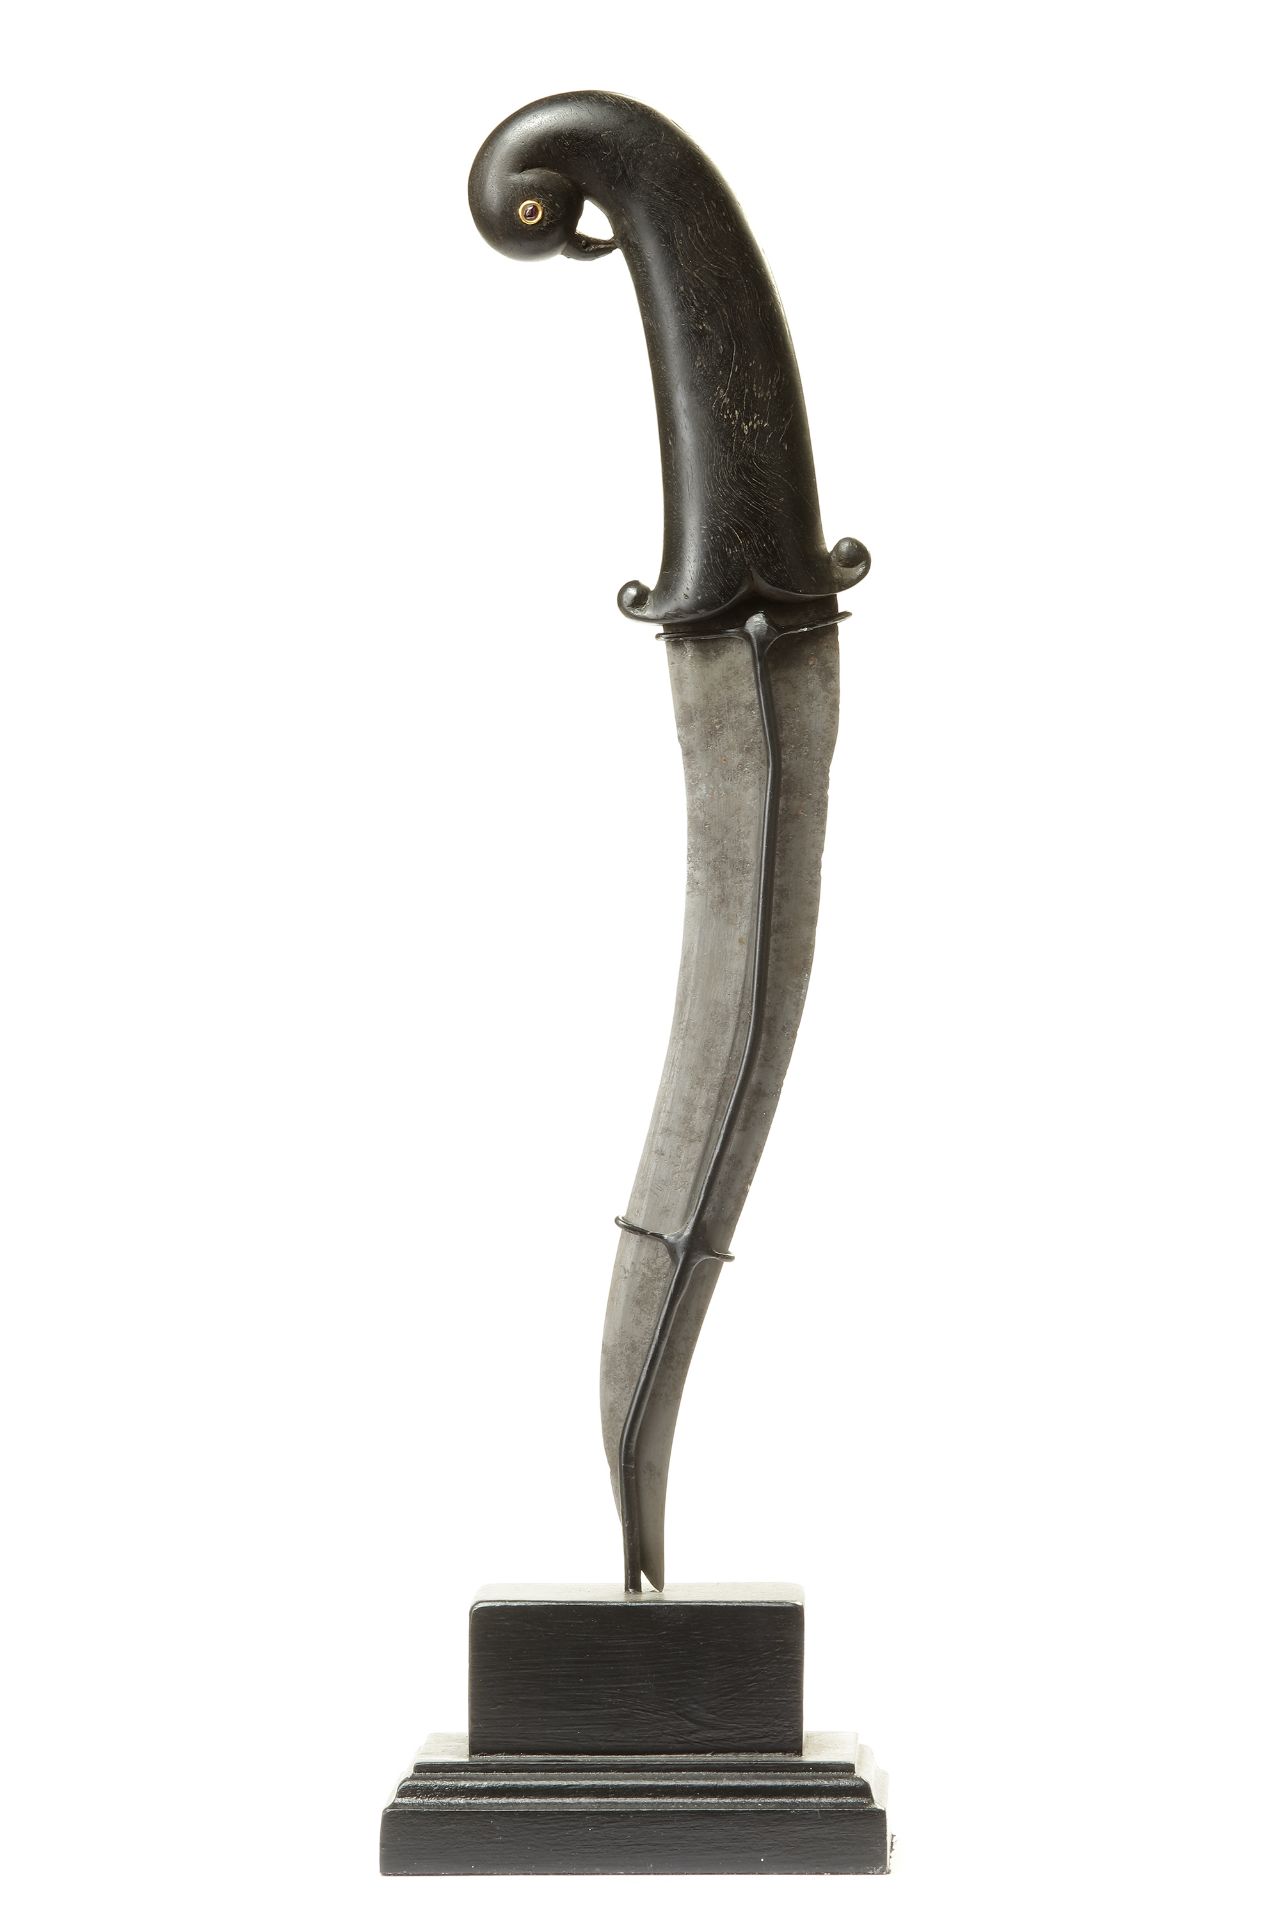 A MUGHAL DAGGER WITH PIGEON-SHAPED HILT, INDIA, 18TH CENTURY - Image 2 of 2